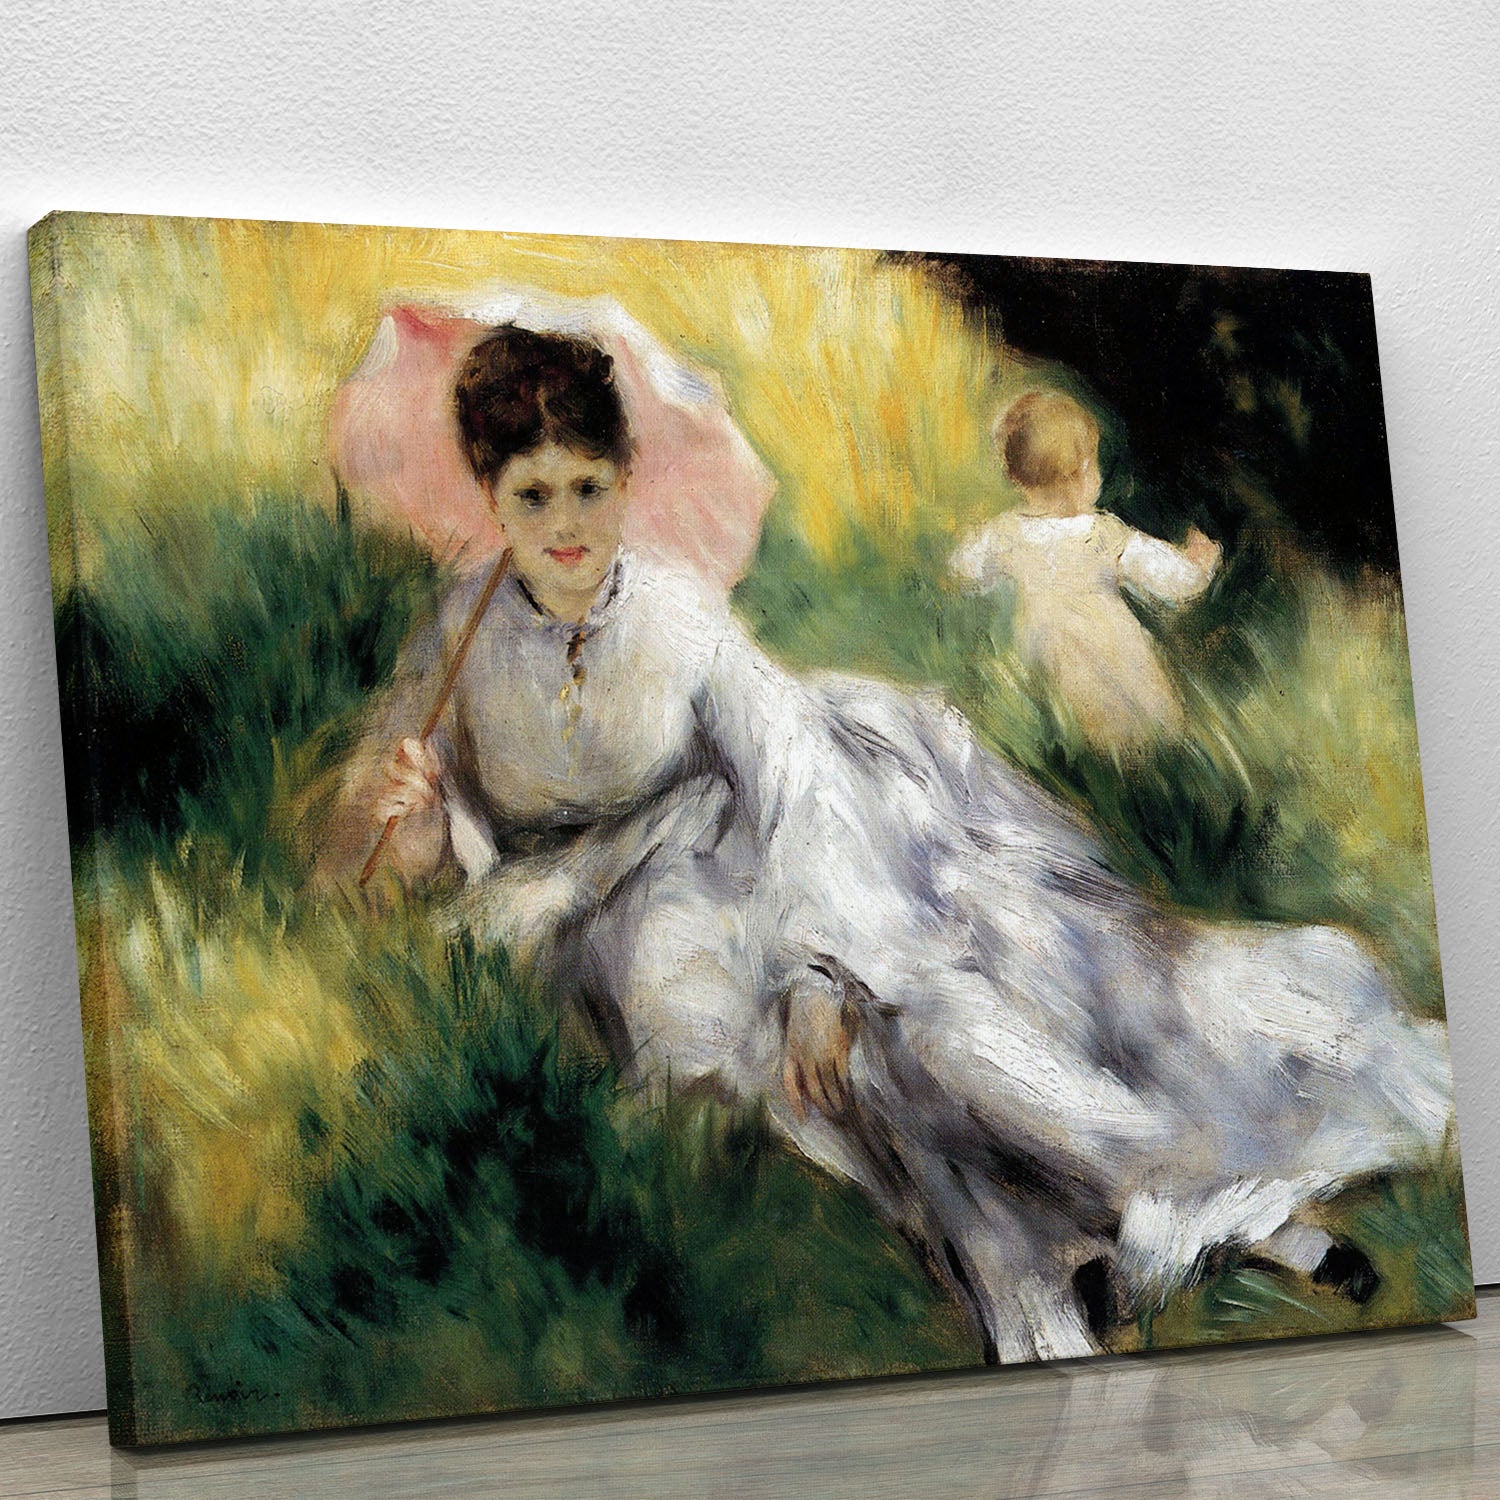 Woman with Parasol by Renoir Canvas Print or Poster - Canvas Art Rocks - 1